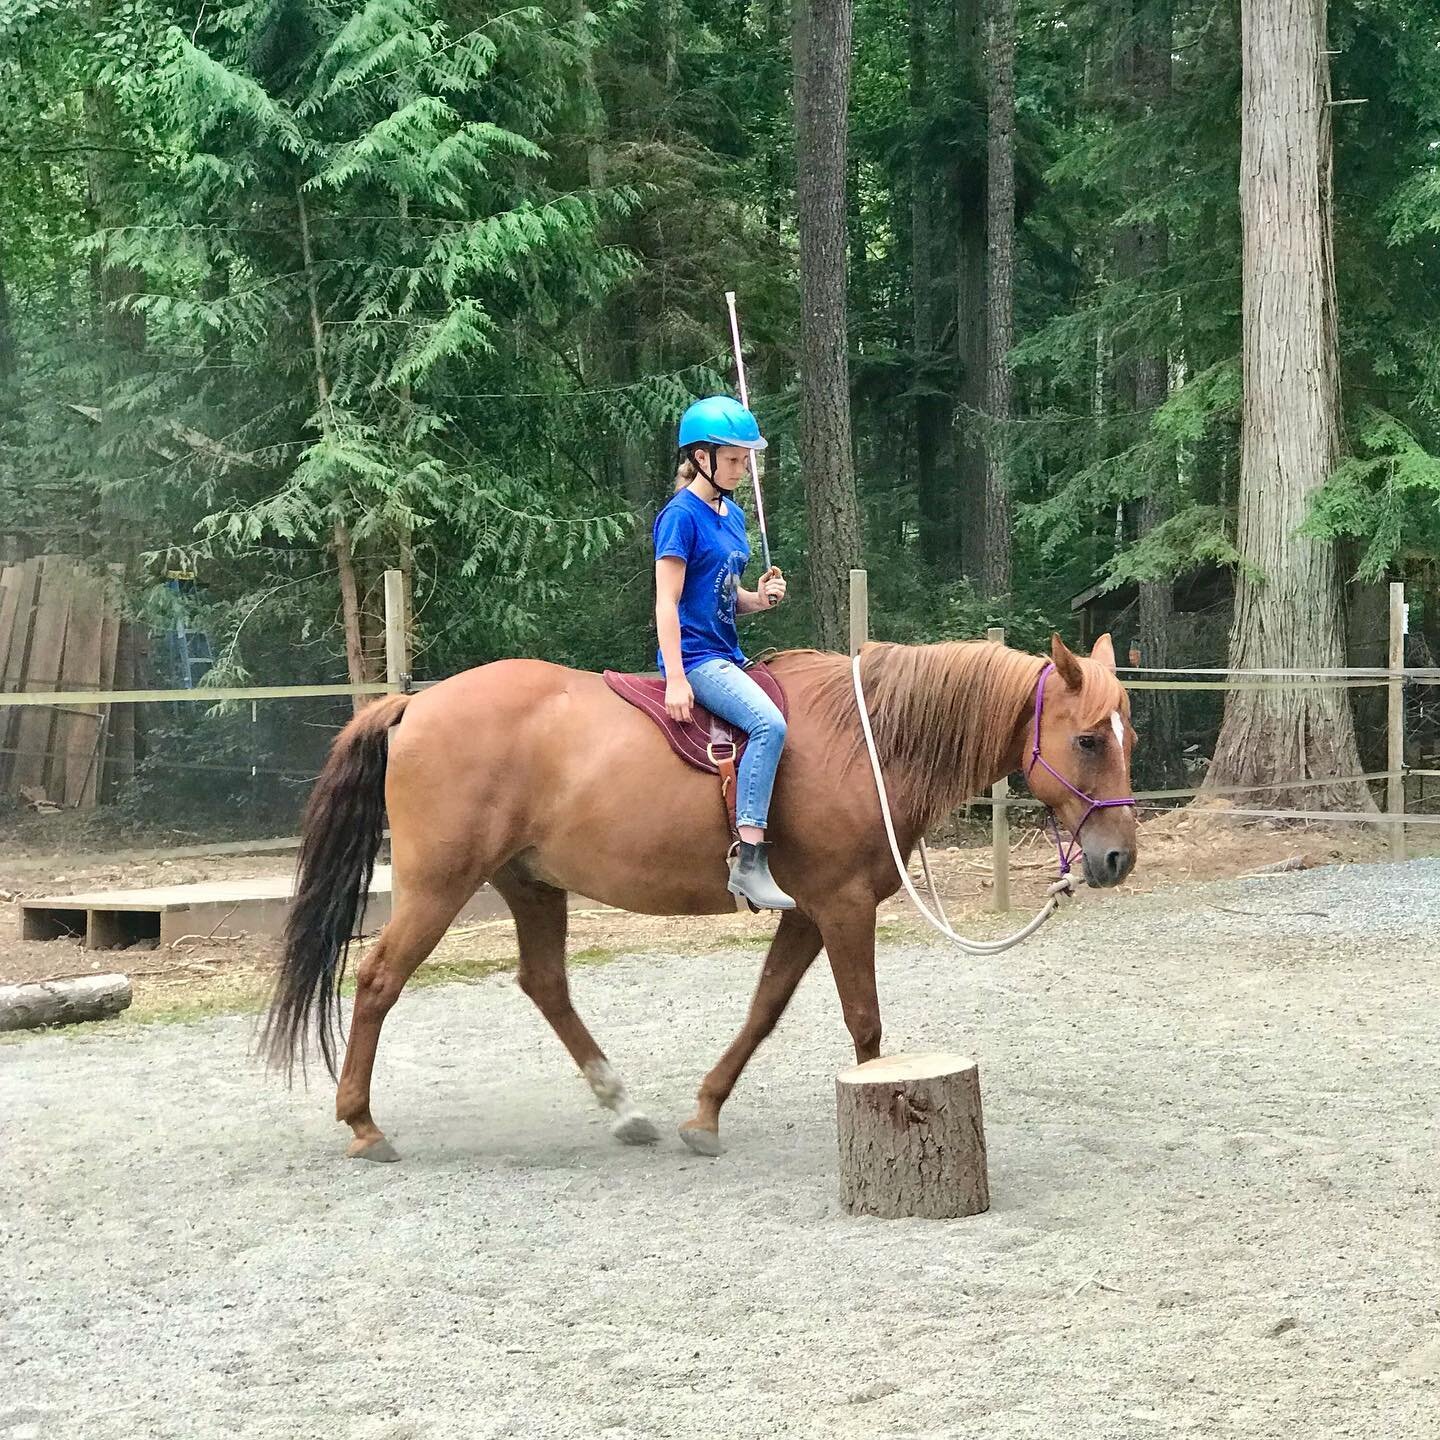 Yesterday&rsquo;s kids day was all about FreeStyle! 🐎 The more advanced riders moved up to riding with two sticks and everyone else started riding with a single stick for the first time. 

Before getting on their horses with sticks we checked off so